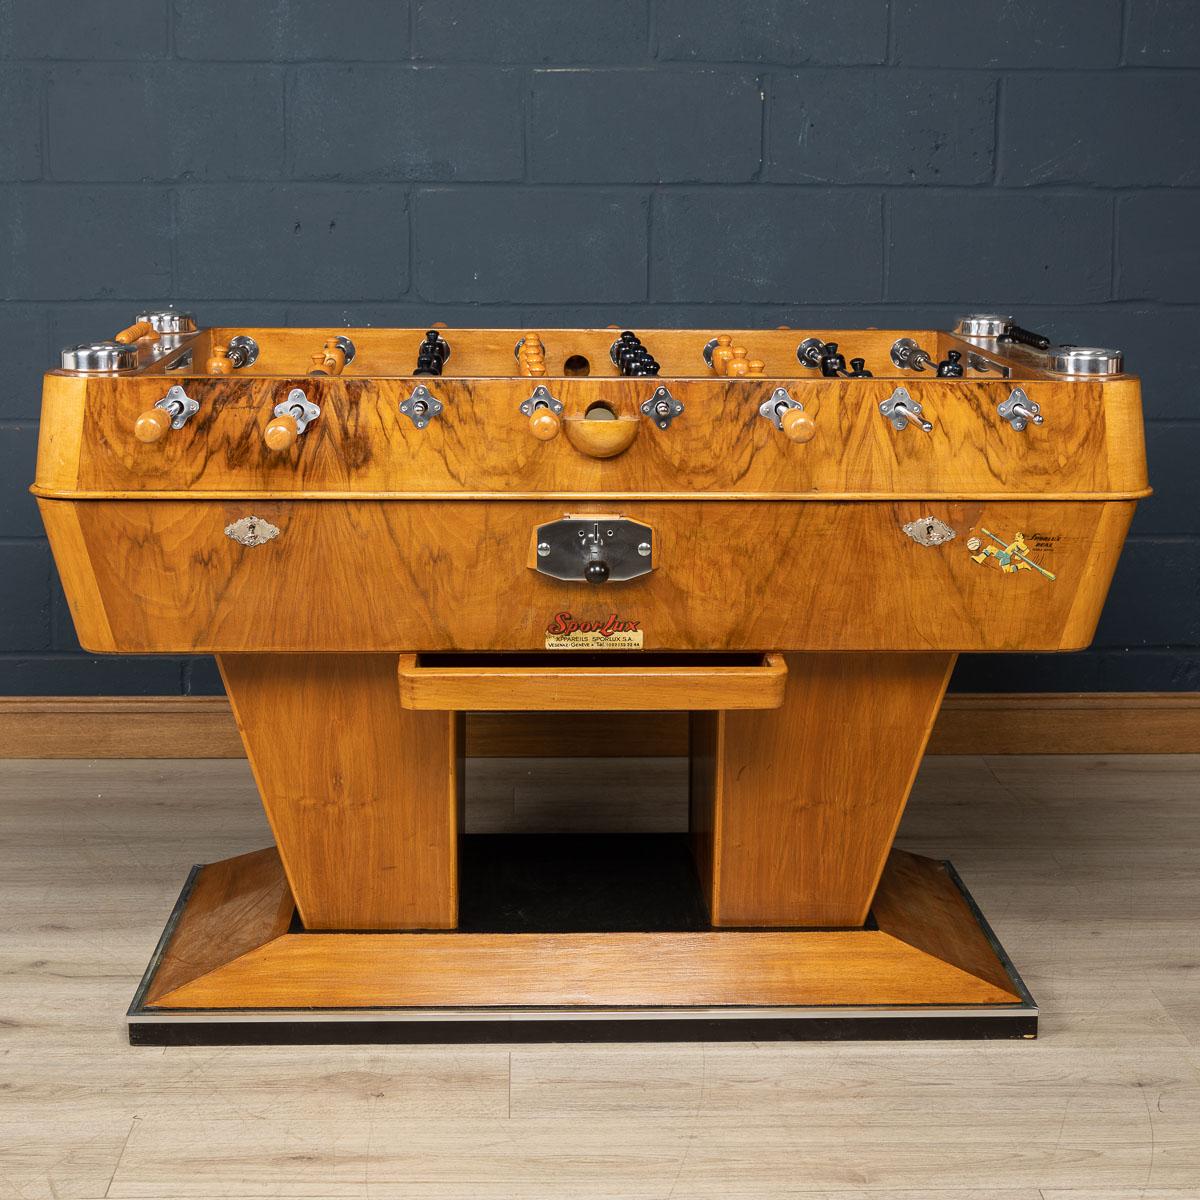 A truly striking table football table made in Switzerland around the middle of the 20th century.

CONDITION
In great vintage condition - sympathetically restored. Plays well.

SIZE
Height: 95cm
Width: 144cm
Depth (table only): 85cm
Depth